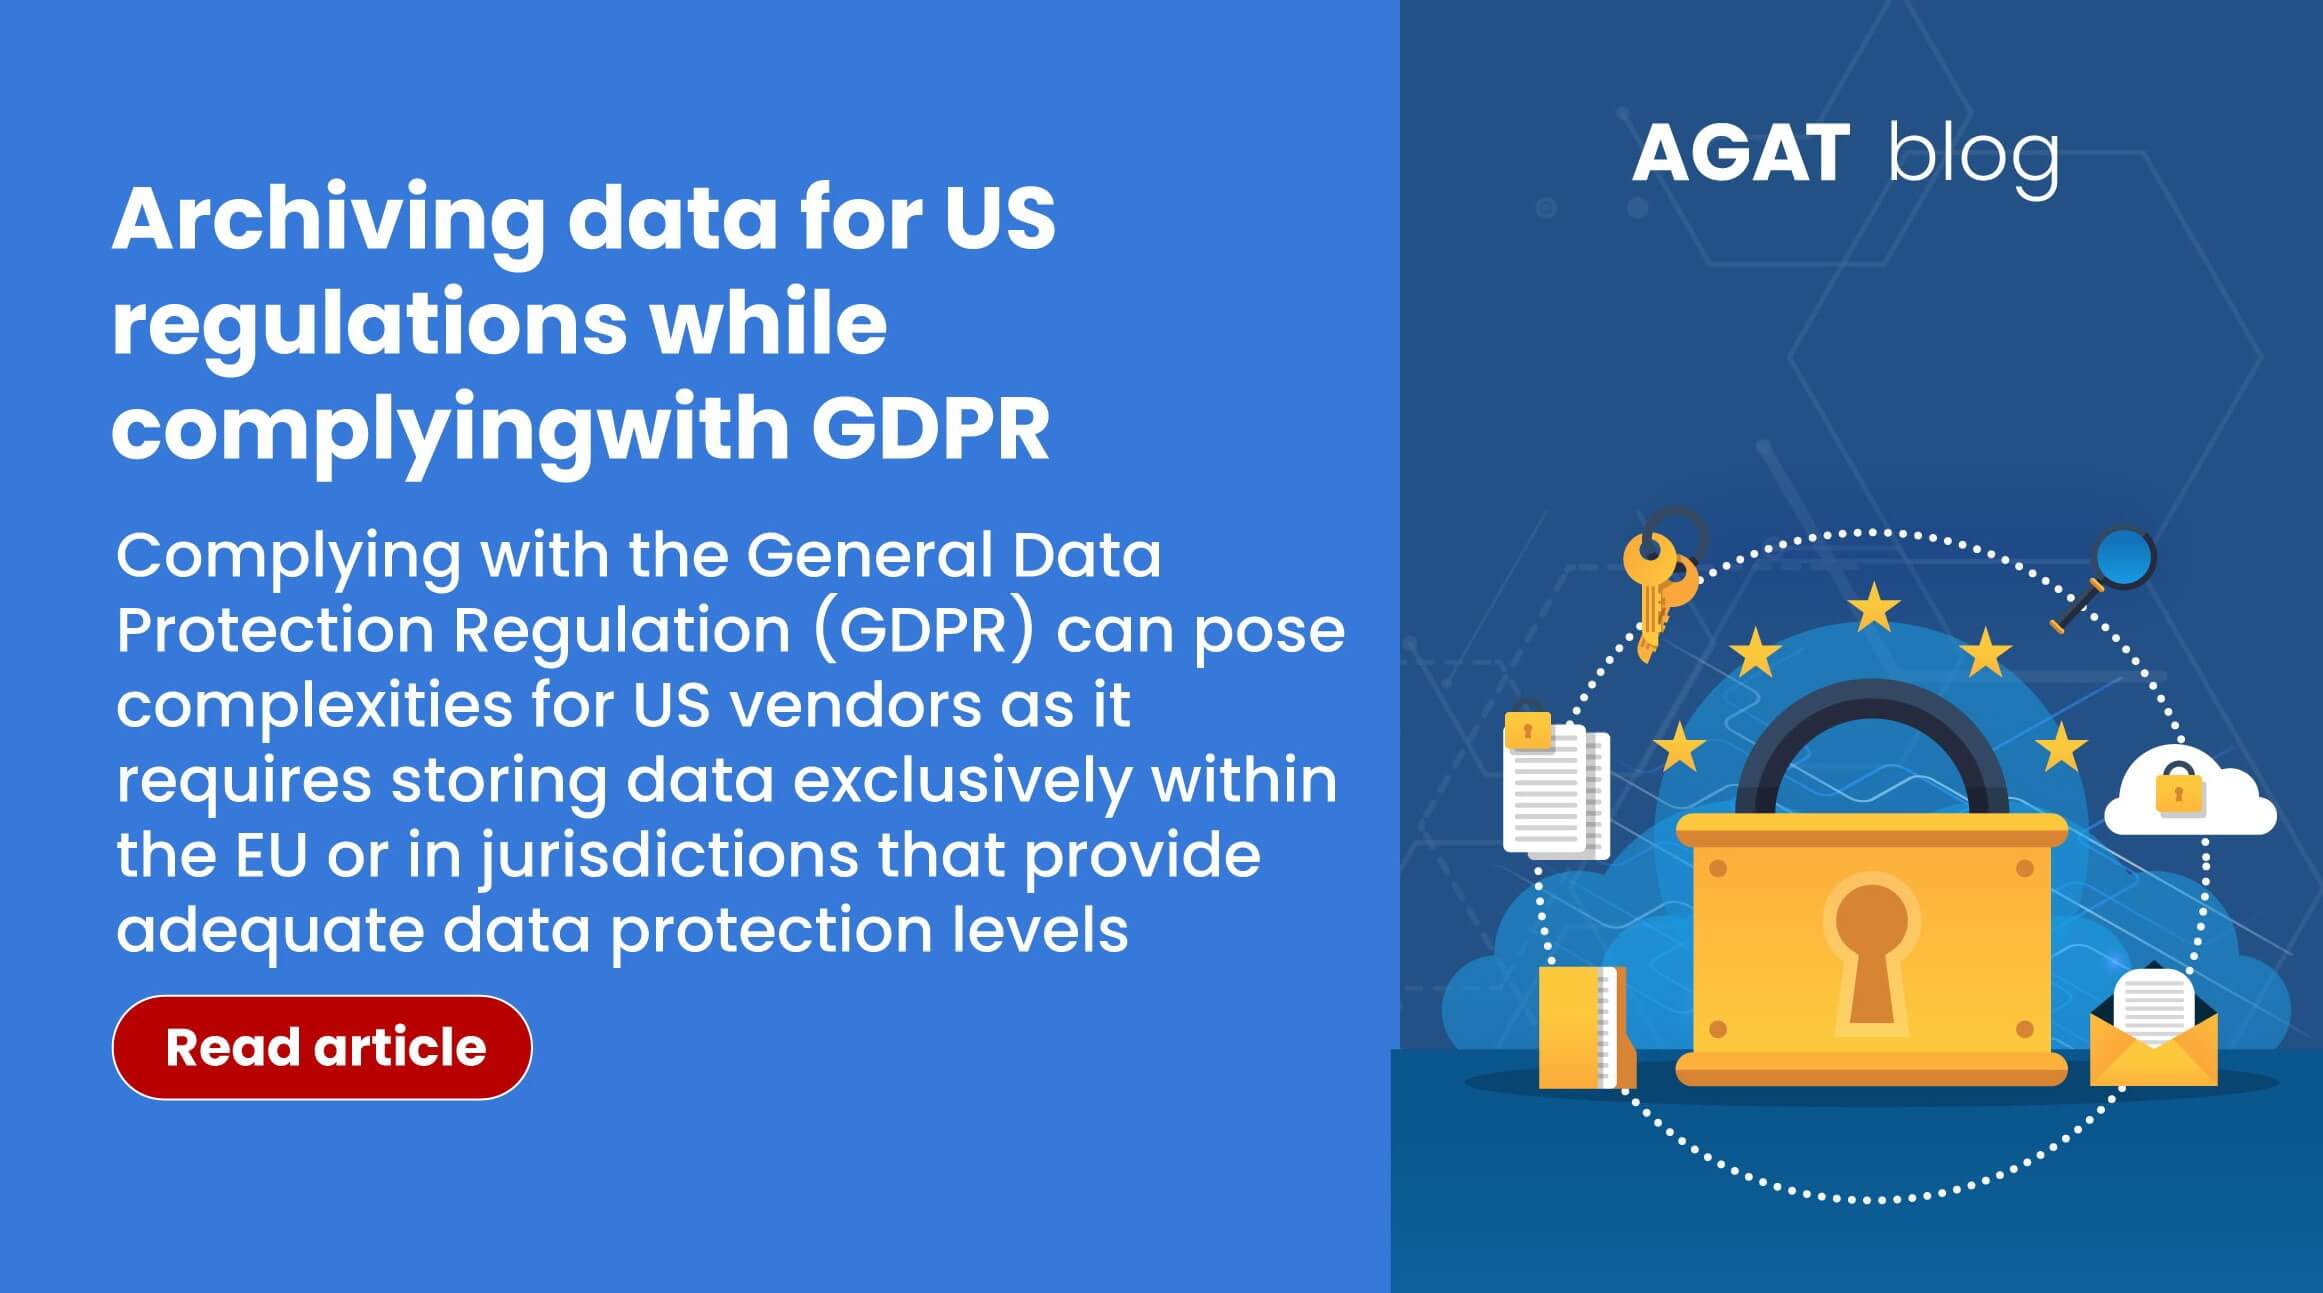 Archiving data for US regulations while complying with GDPR